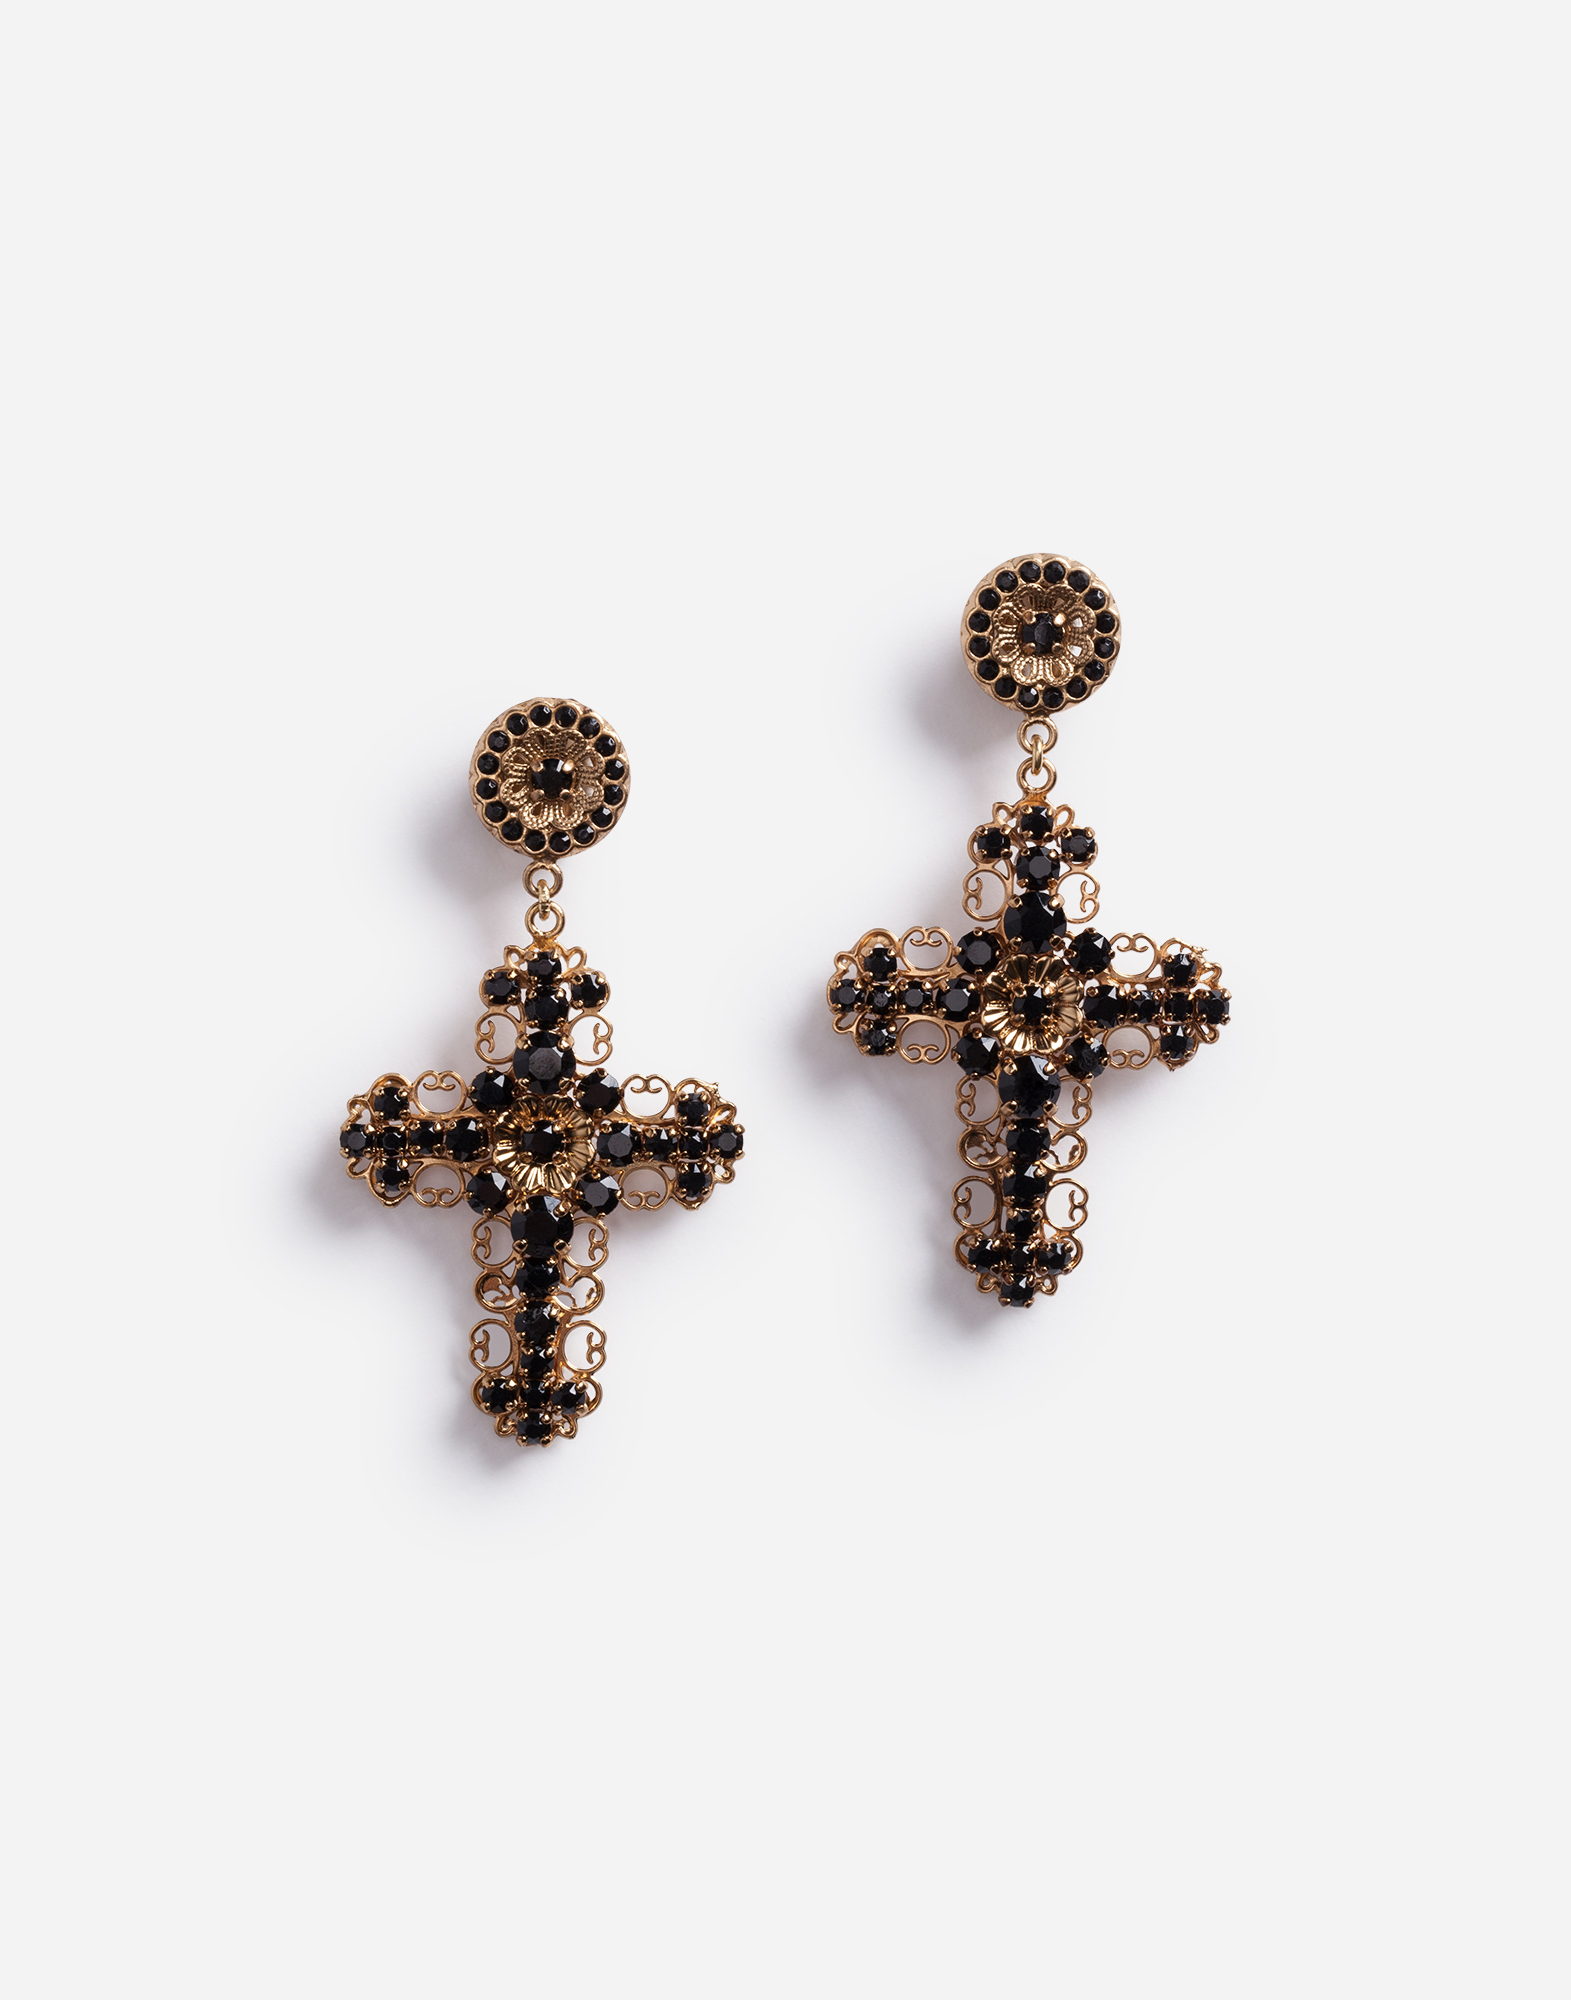 Pendant earrings with decorative elements in Gold